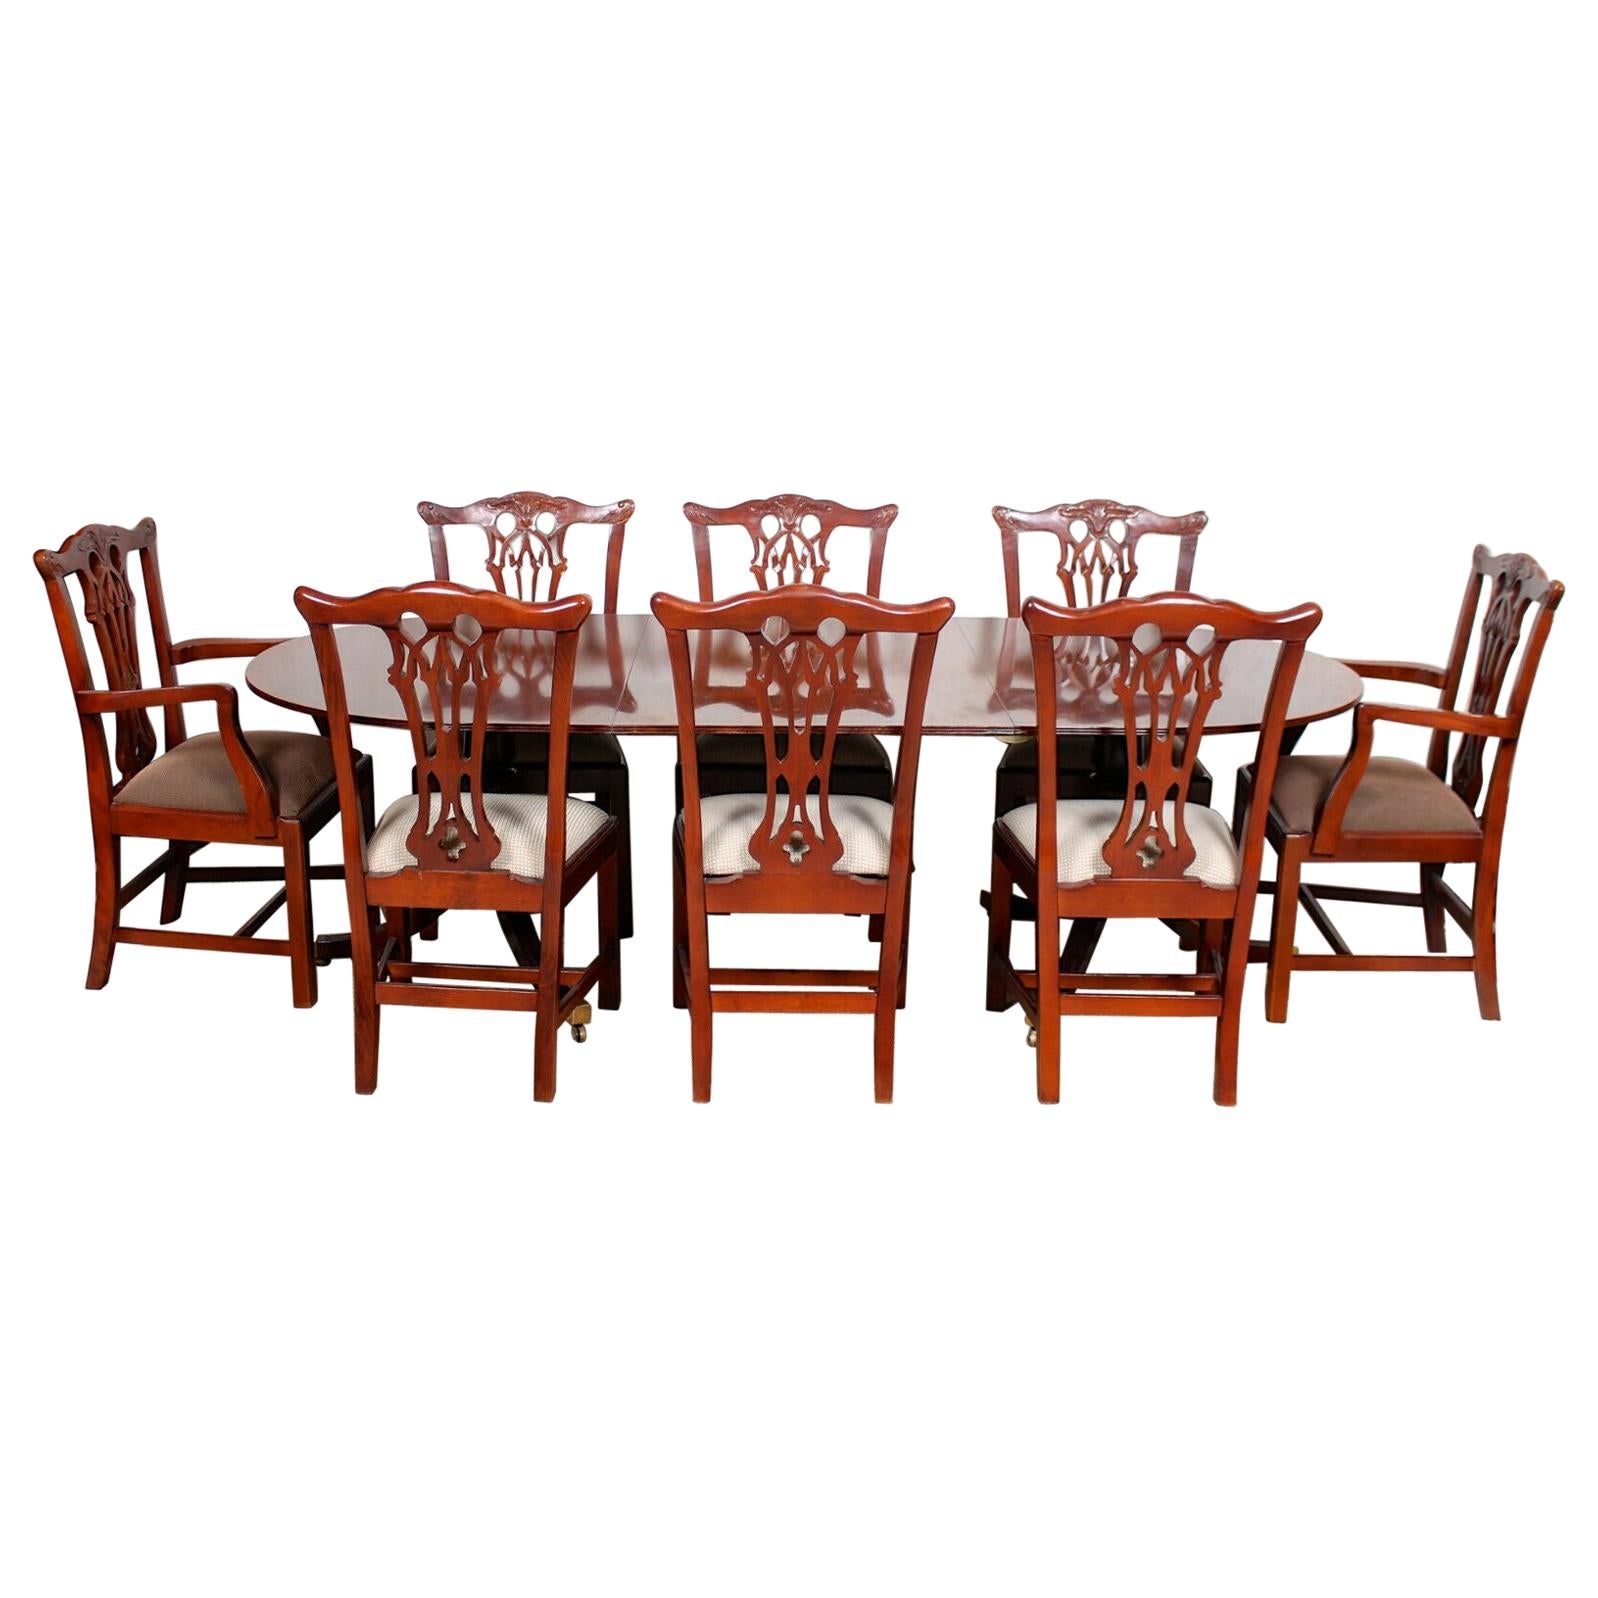 English Mahogany Dining Table and 8 Chairs Hepplewhite Stalker Antique Vintage For Sale